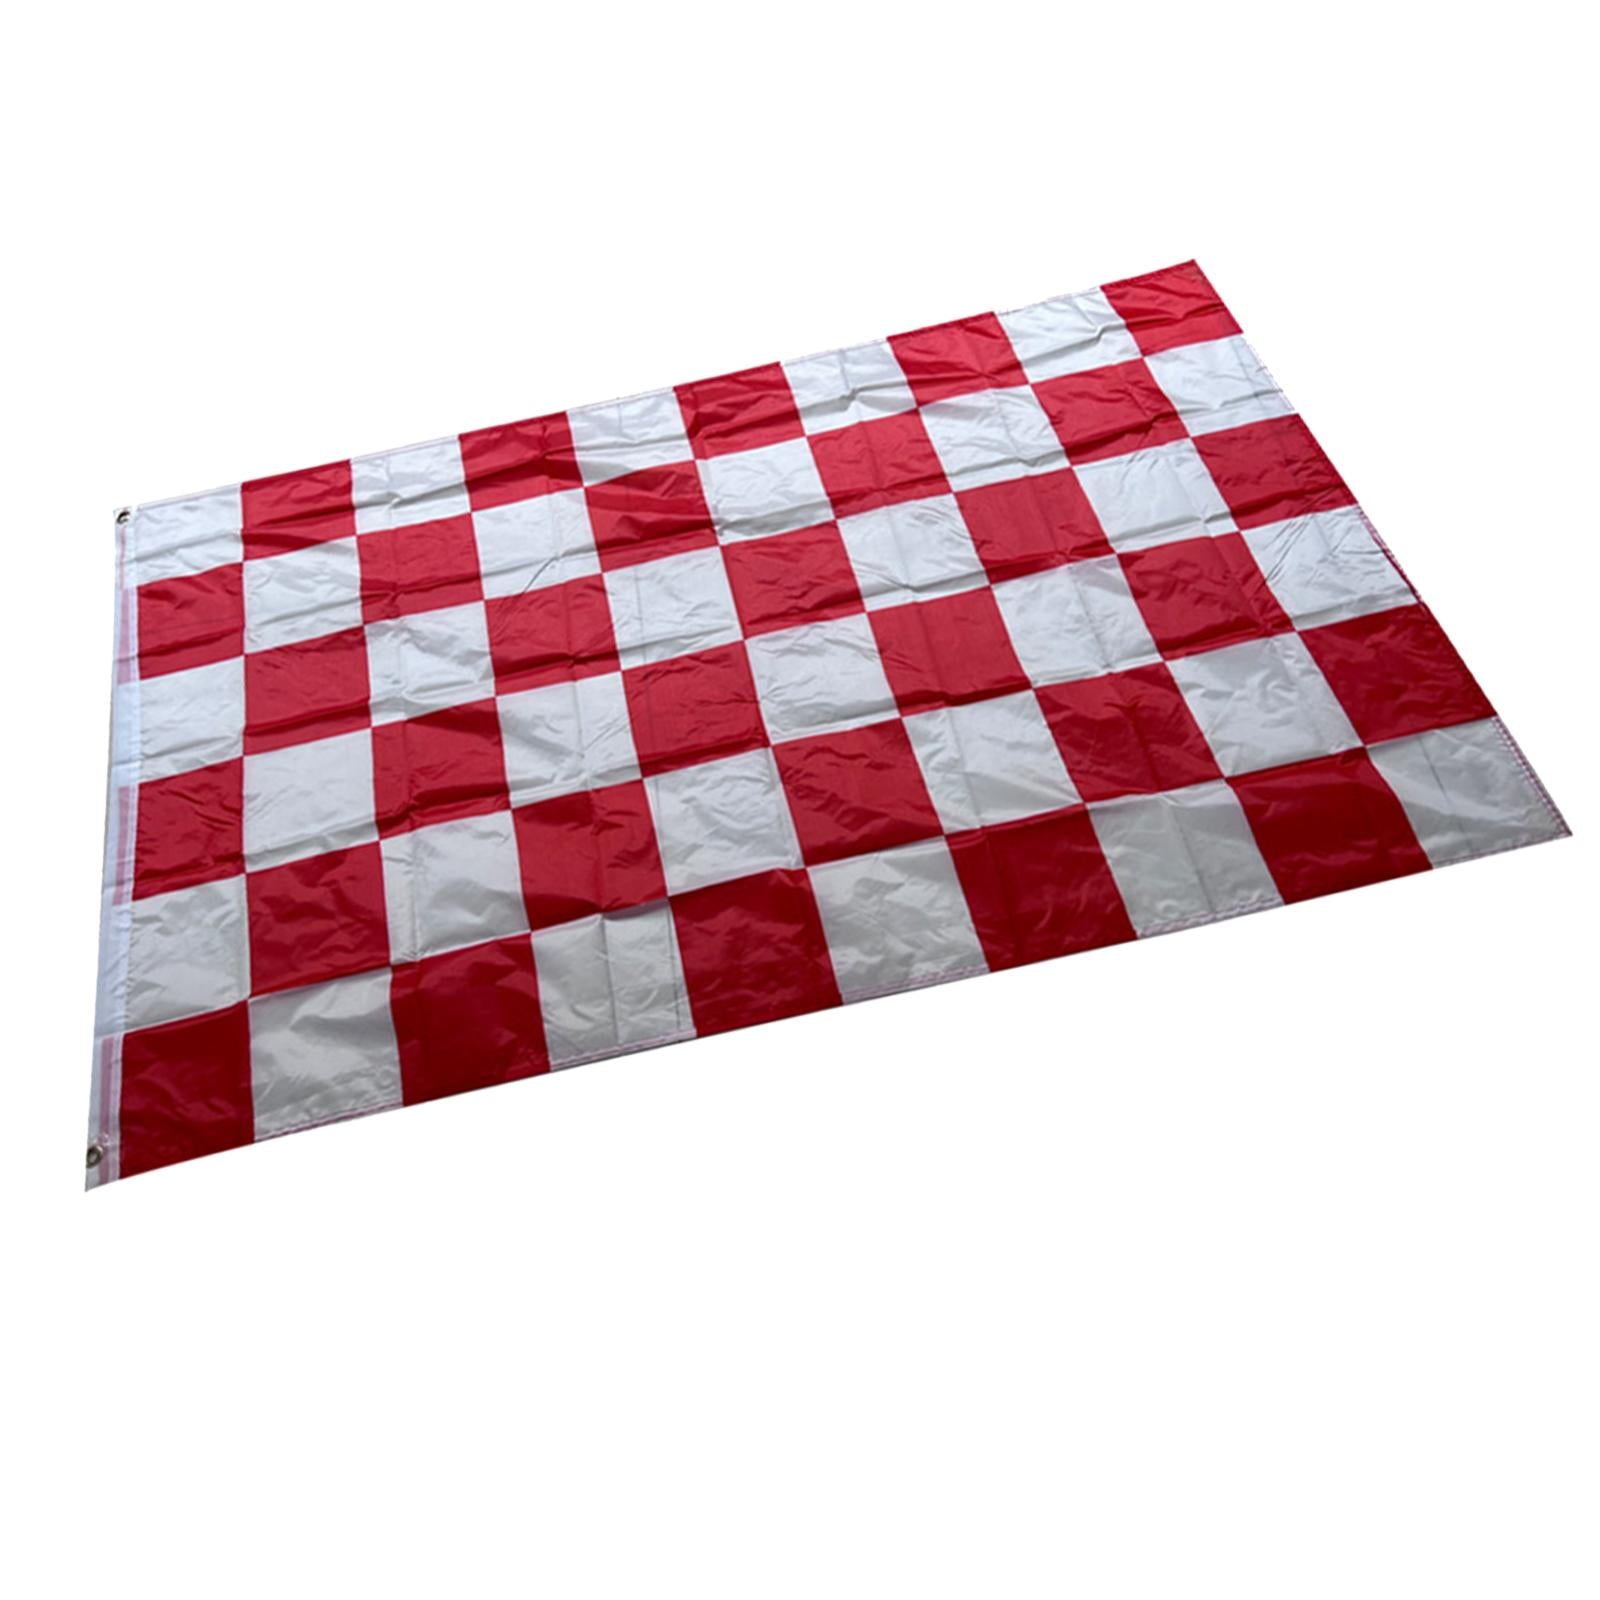 Red and White Check Flag Checkered Flags for Decorating Home Party